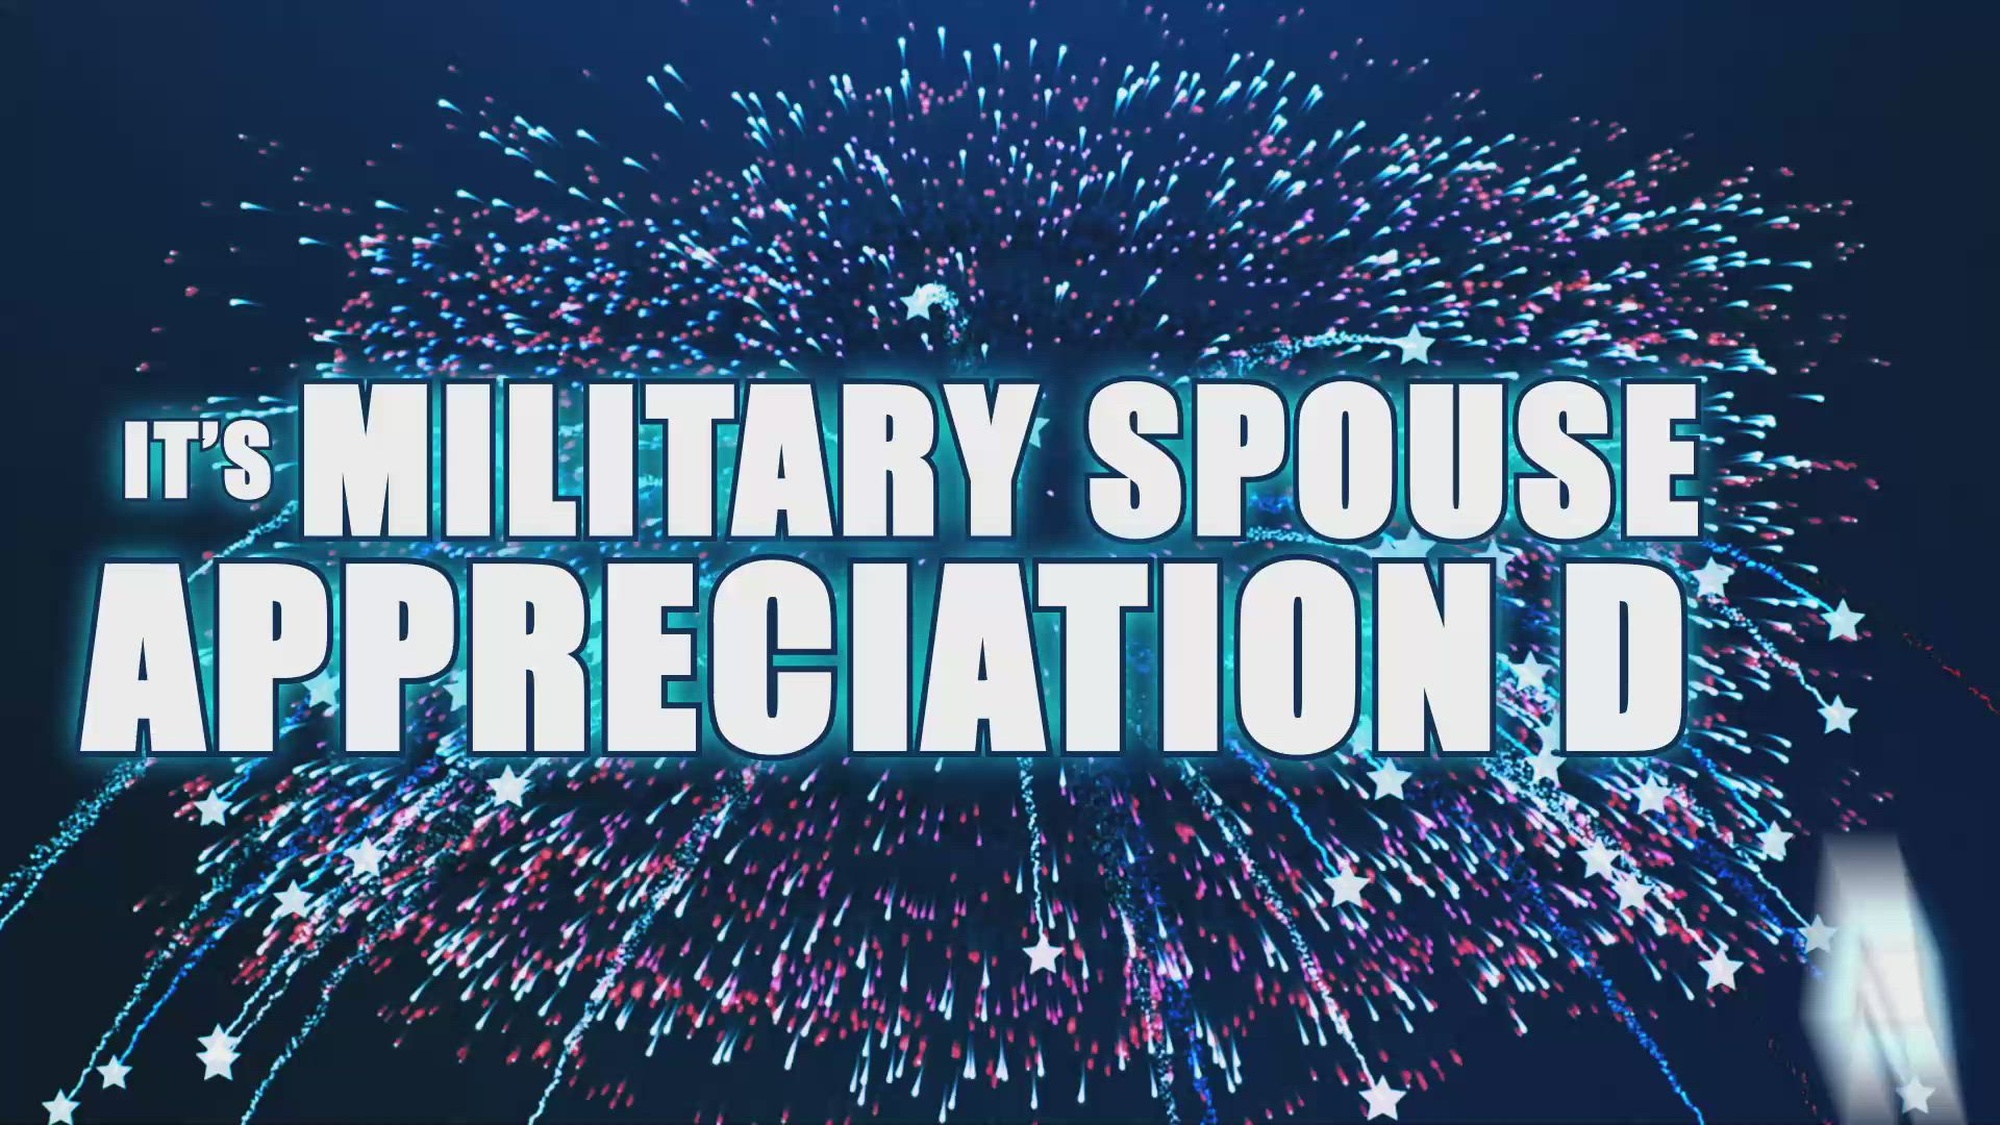 May 6, 2022 is Military Spouse Appreciation Day. It is a day where we take the time to recognise the support and sacrifices made by spouses within the U.S. military, and how each spouse plays a vital role in the mission.